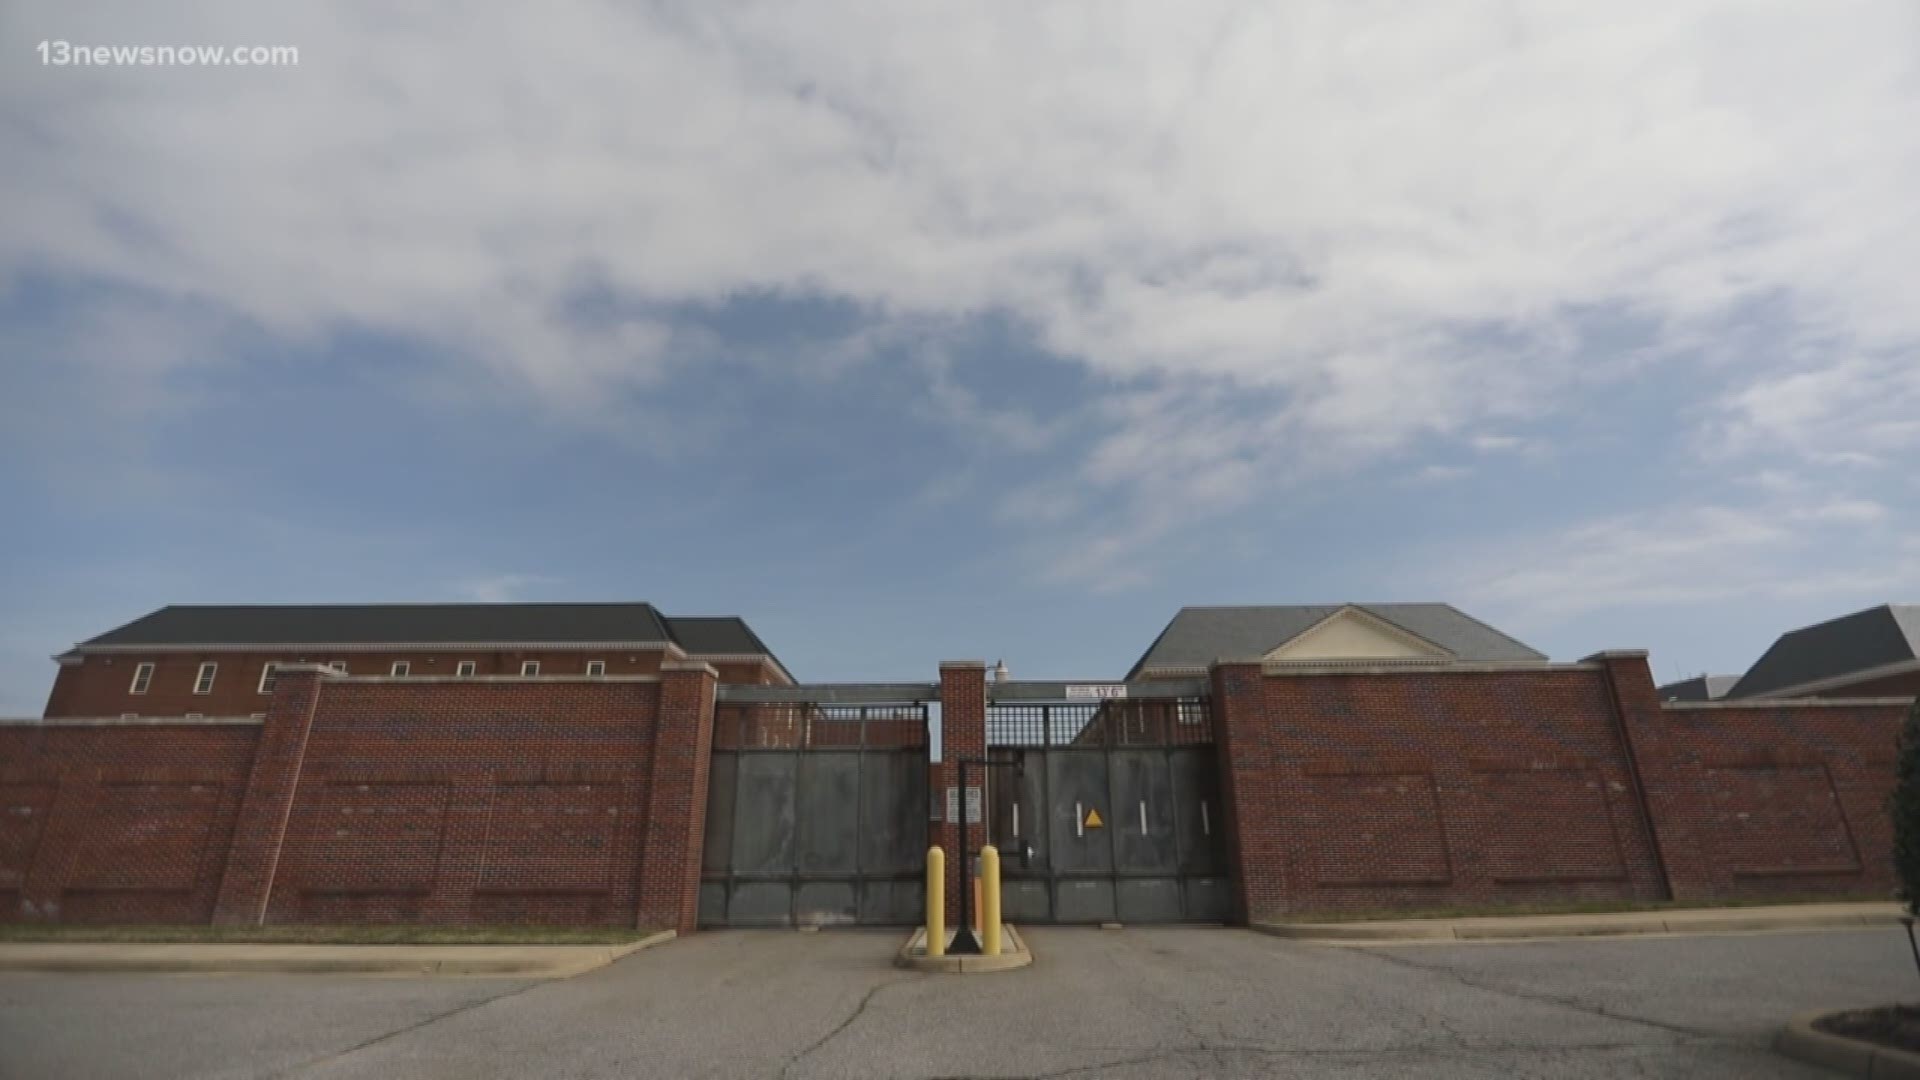 Virginia Beach's Sheriff said "If it gets in the jail, it's going to be too late." Many inmates are inherently high-risk and they can't maintain social distancing.